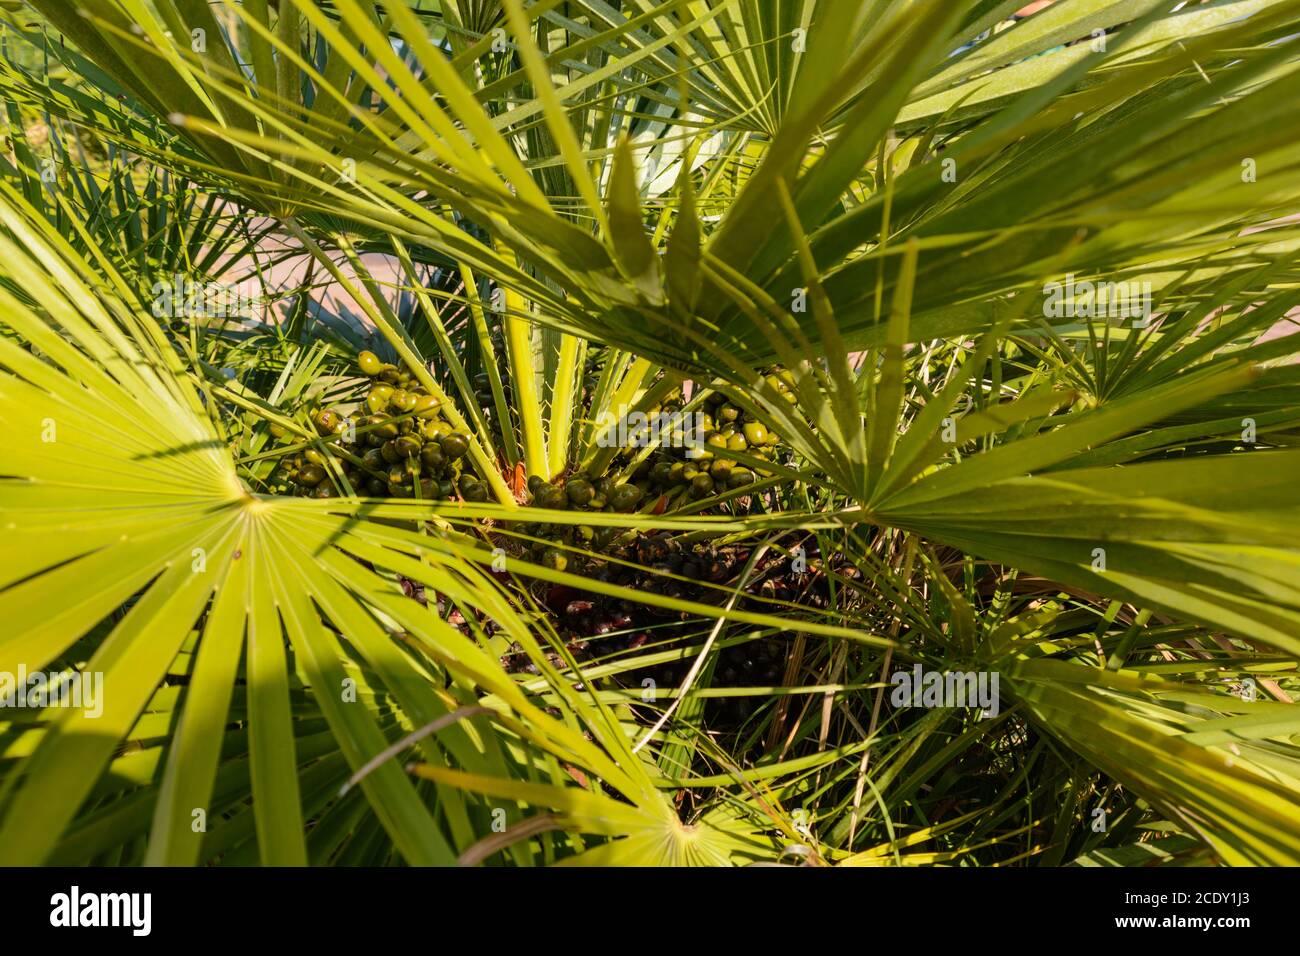 Date Palm - Close-up of a palm tree with fruits in the palm crown Stock Photo